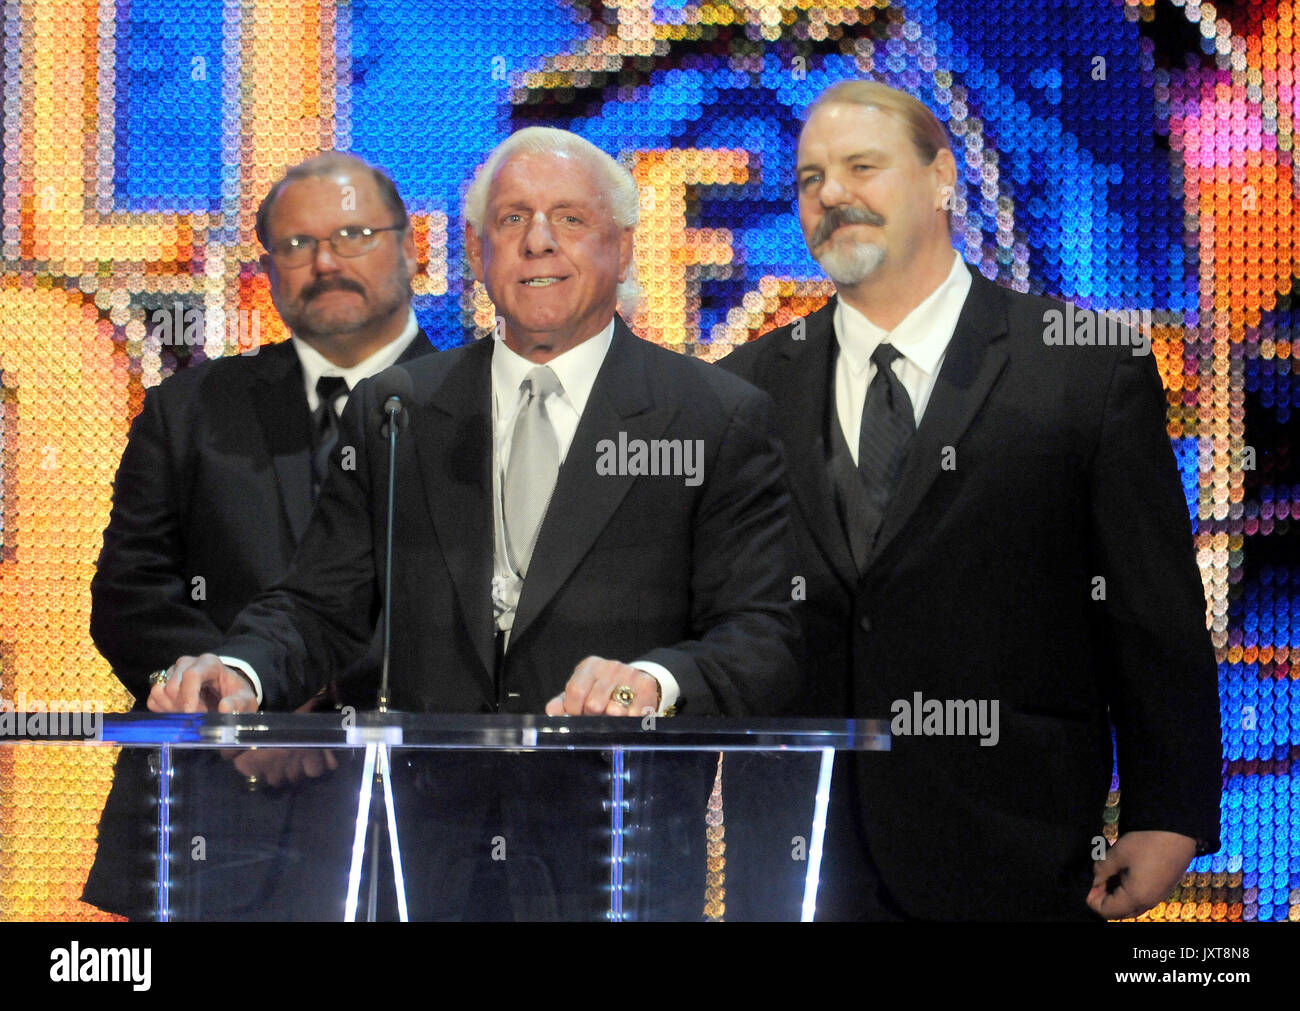 Arn Anderson, Ric Flair and Barry Windham pictured at the WWE Hall Of Fame induction ceremony for the Four Horsemen at the American Airlines Arena in Miami, Florida on March 31, 2012. Credit: George Napolitano/MediaPunch Stock Photo